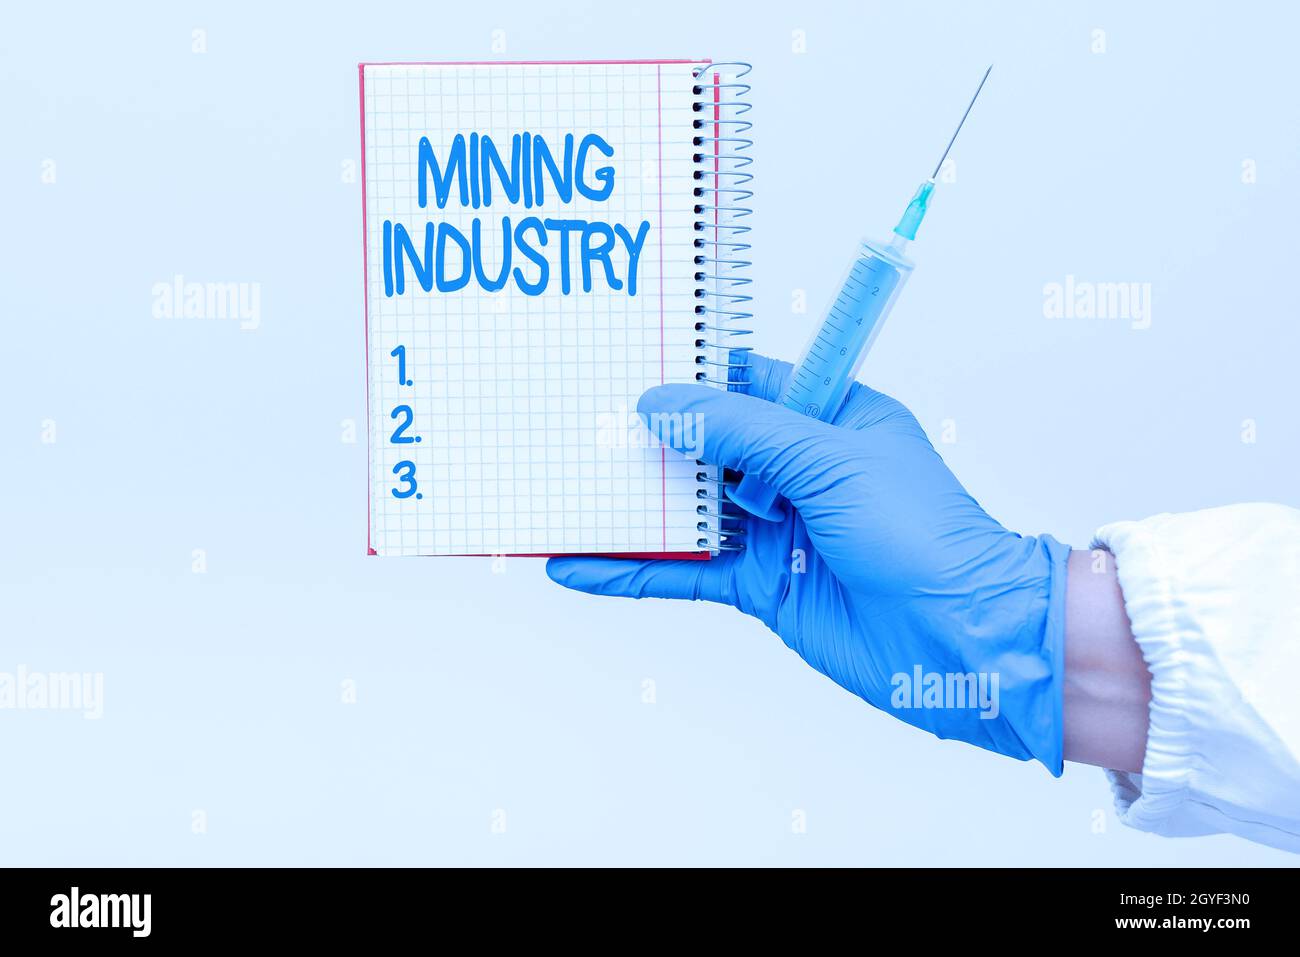 Sign displaying Mining Industry, Business showcase extraction of precious minerals and geological materials Preparing Medical Vaccine Presenting New M Stock Photo